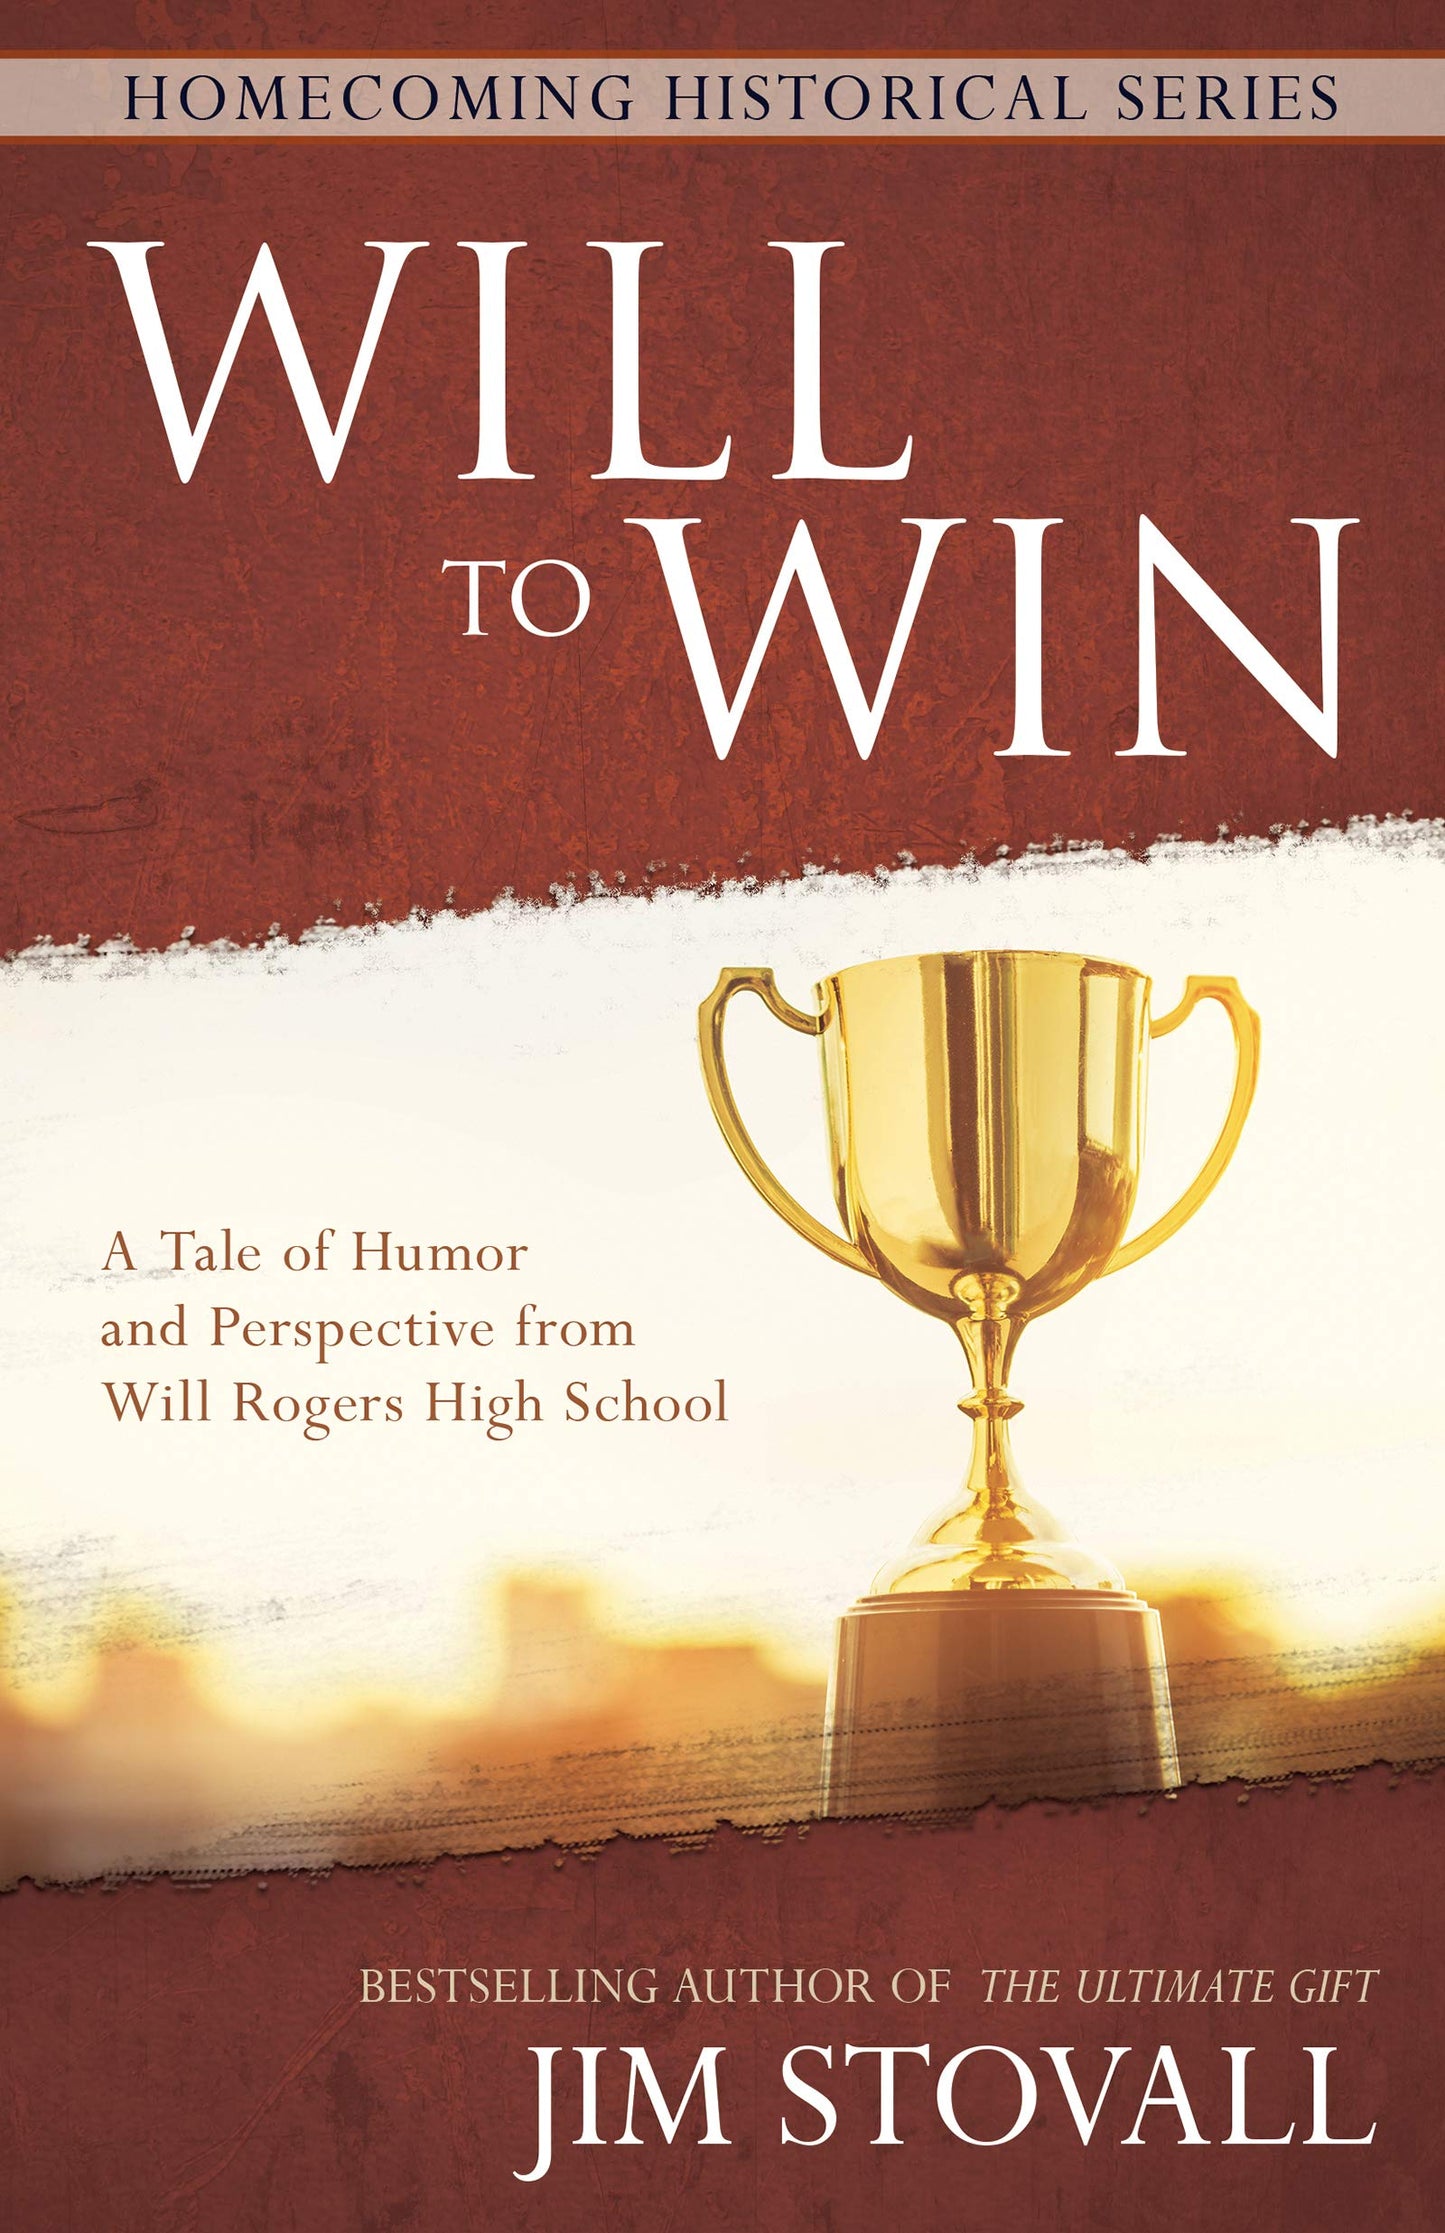 Will to Win by Jim Stovall